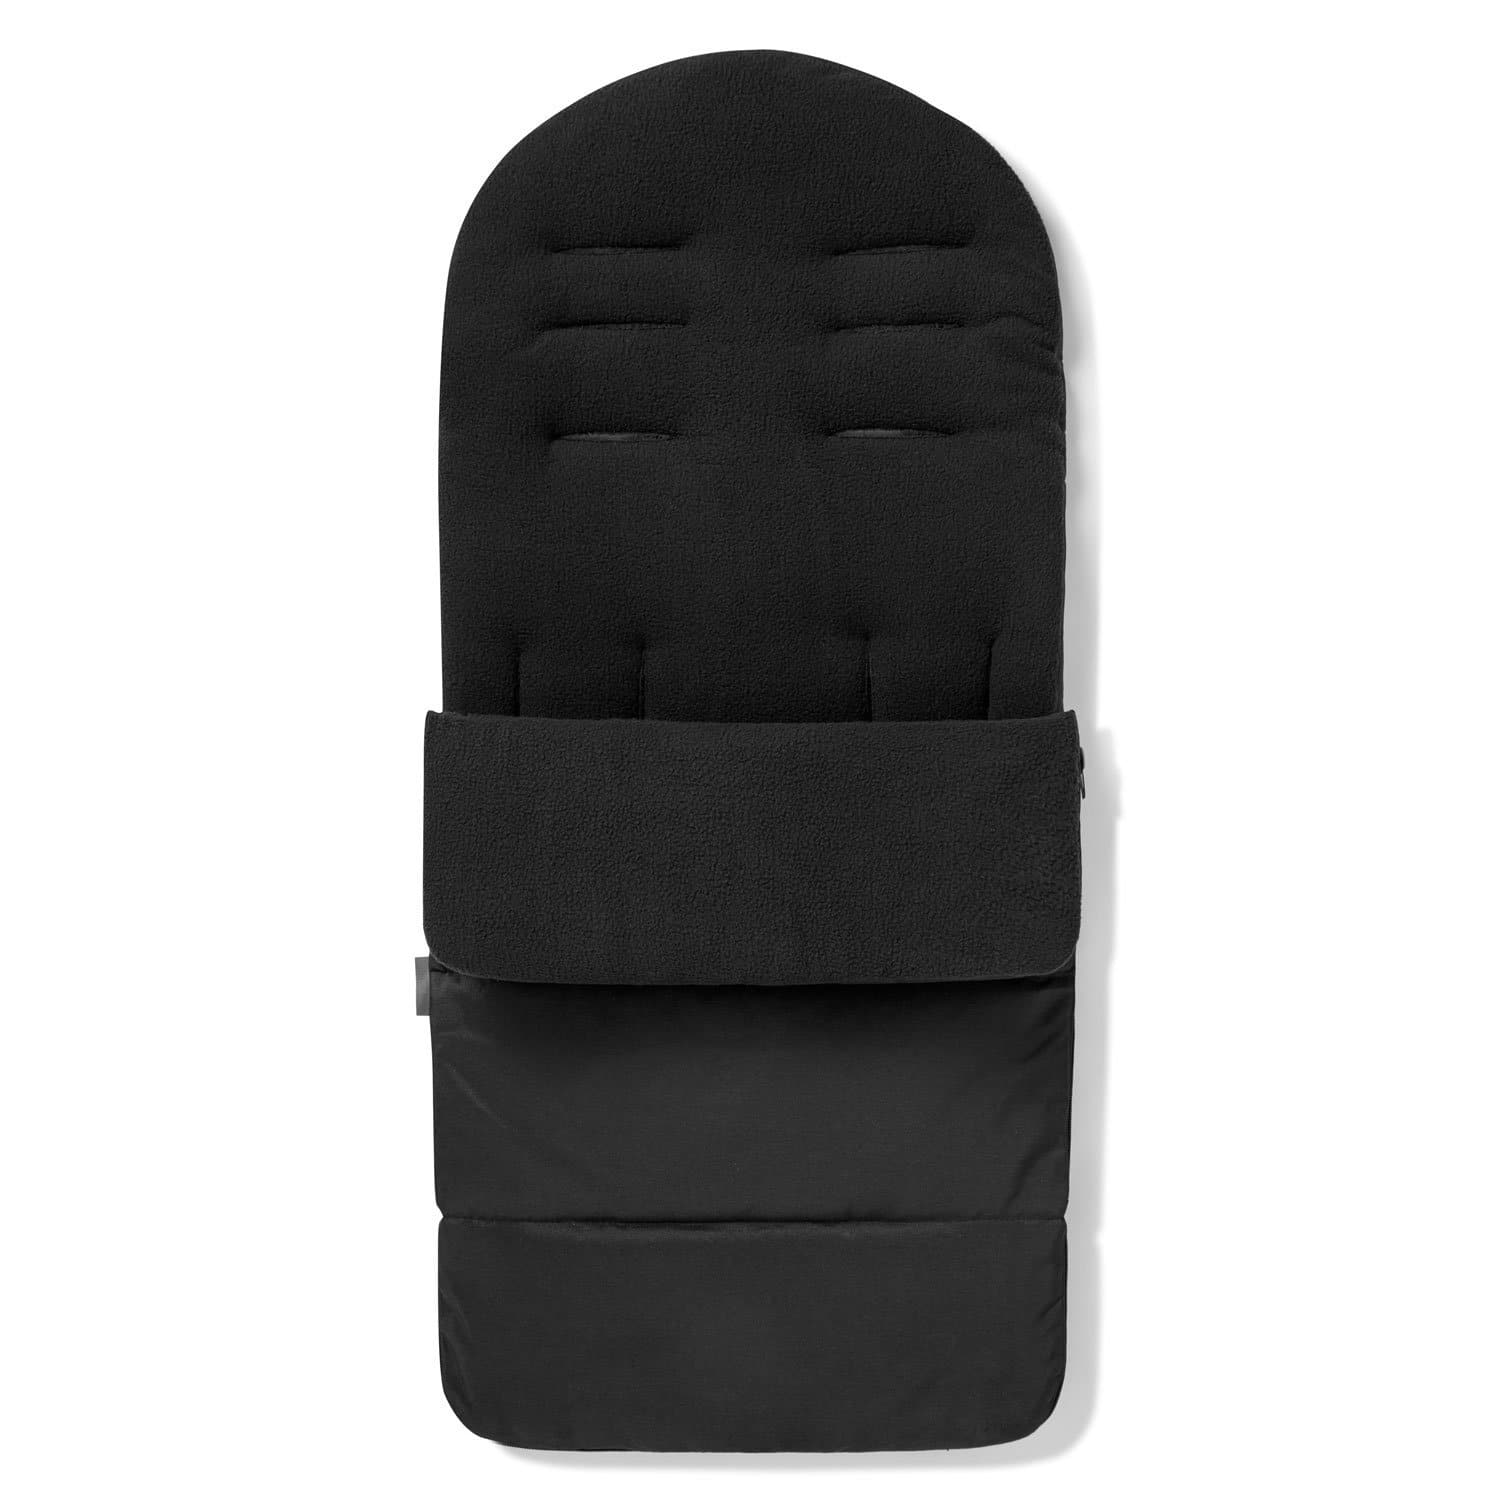 Premium Footmuff / Cosy Toes Compatible with My Babiie - Black Jack / Fits All Models | For Your Little One